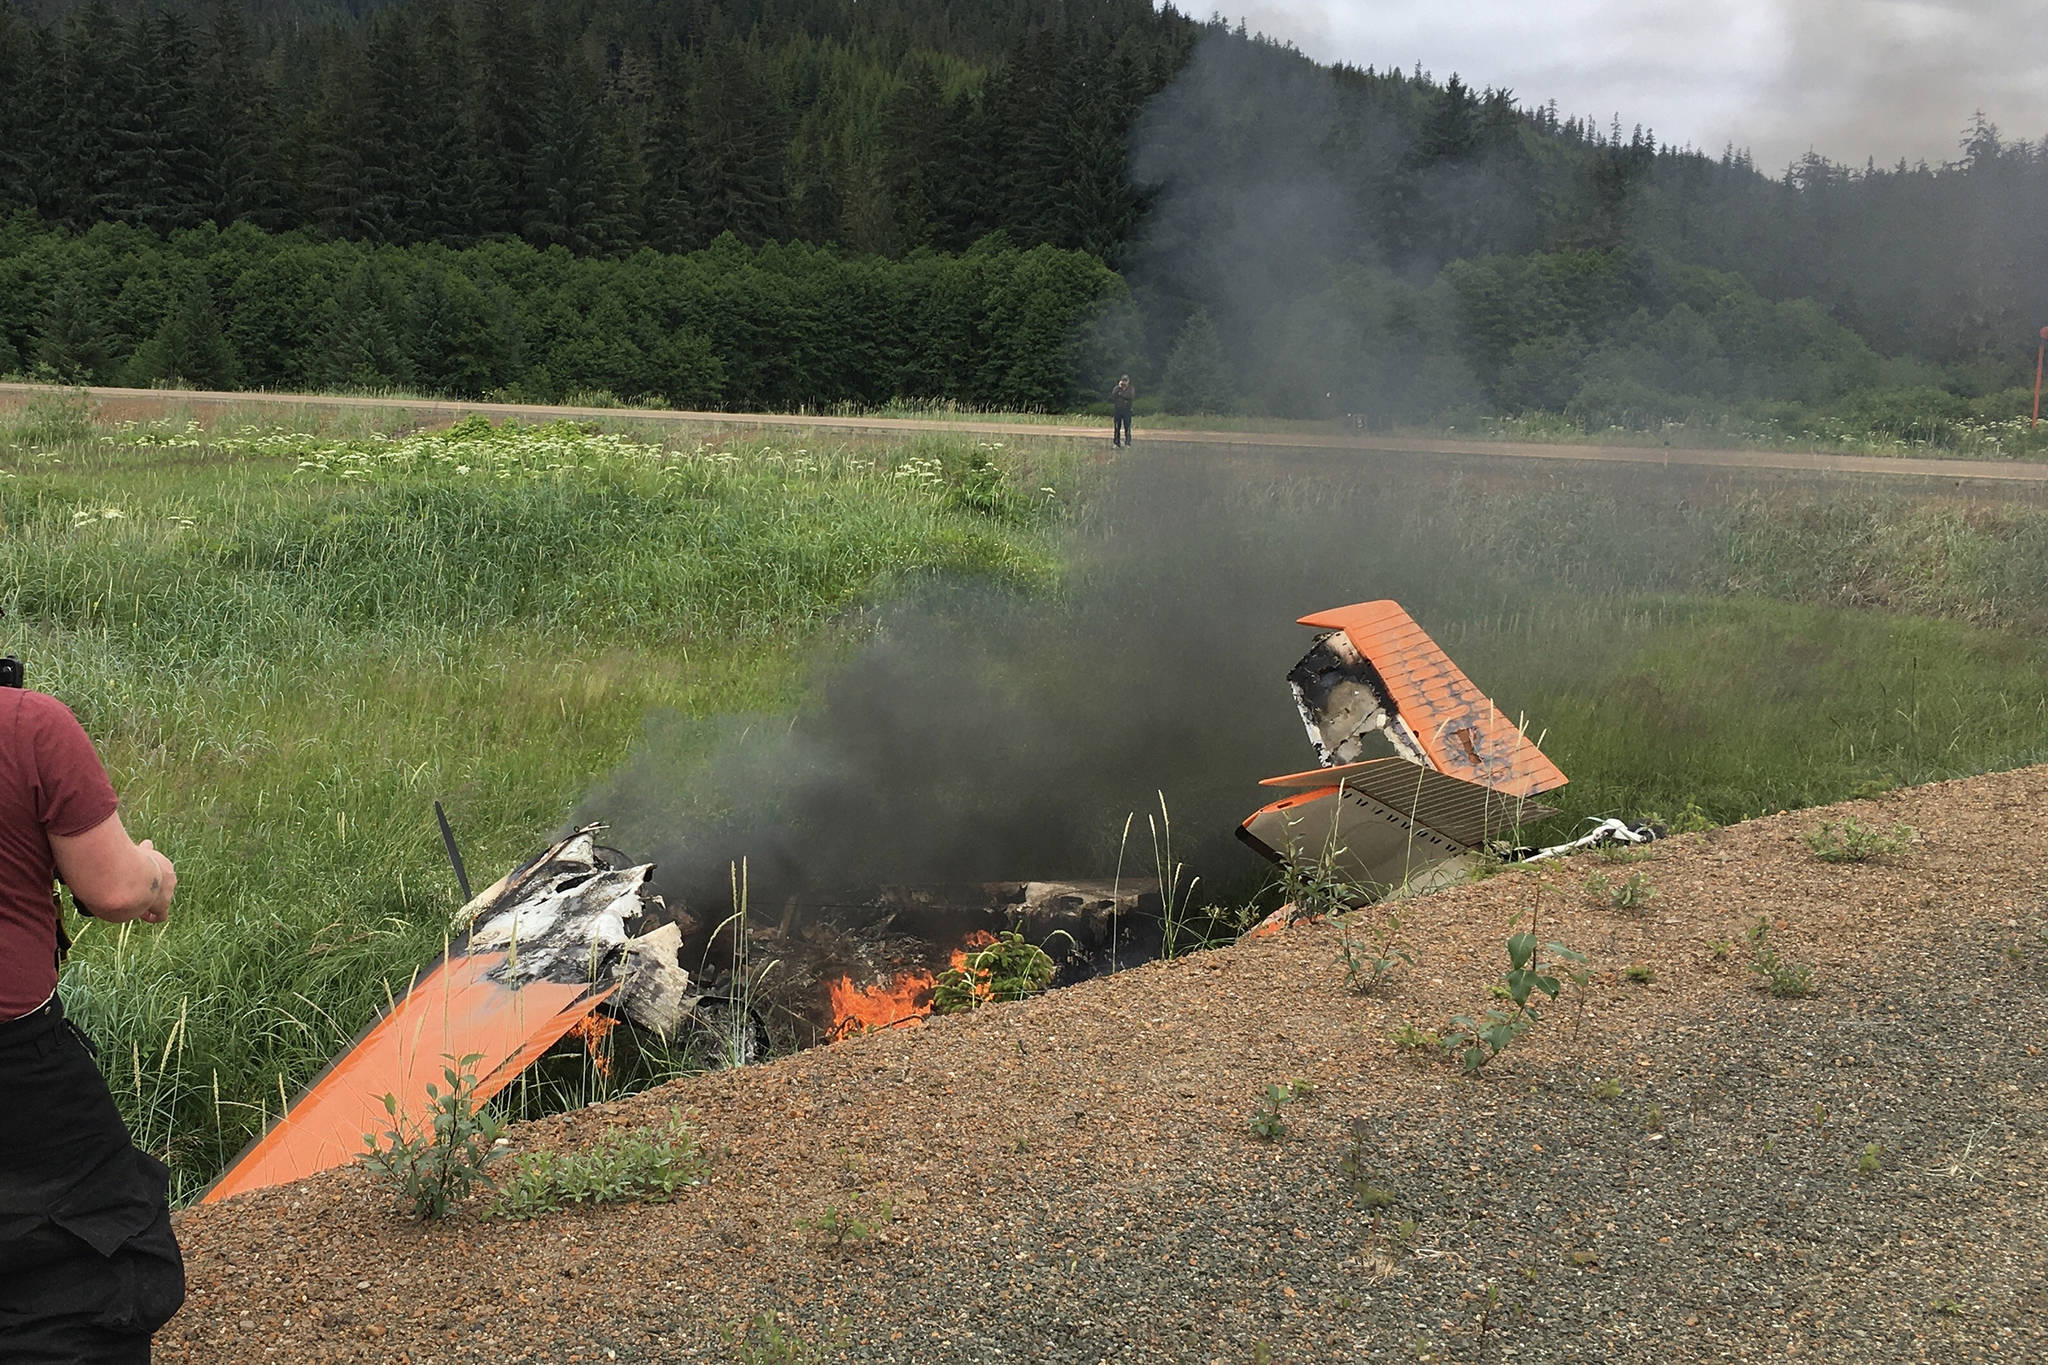 A small two-person plane ran off the runway and into an embankment shortly after landing at Hoonah Airport on Saturday, July 3, 2021. No one was hurt, according to Hoonah Public Safety Director Eric Hurtado, as both passengers were able to get themselves out of and away from the plane before emergency crews arrived. (Courtesy Photo / Thomas Courtney)